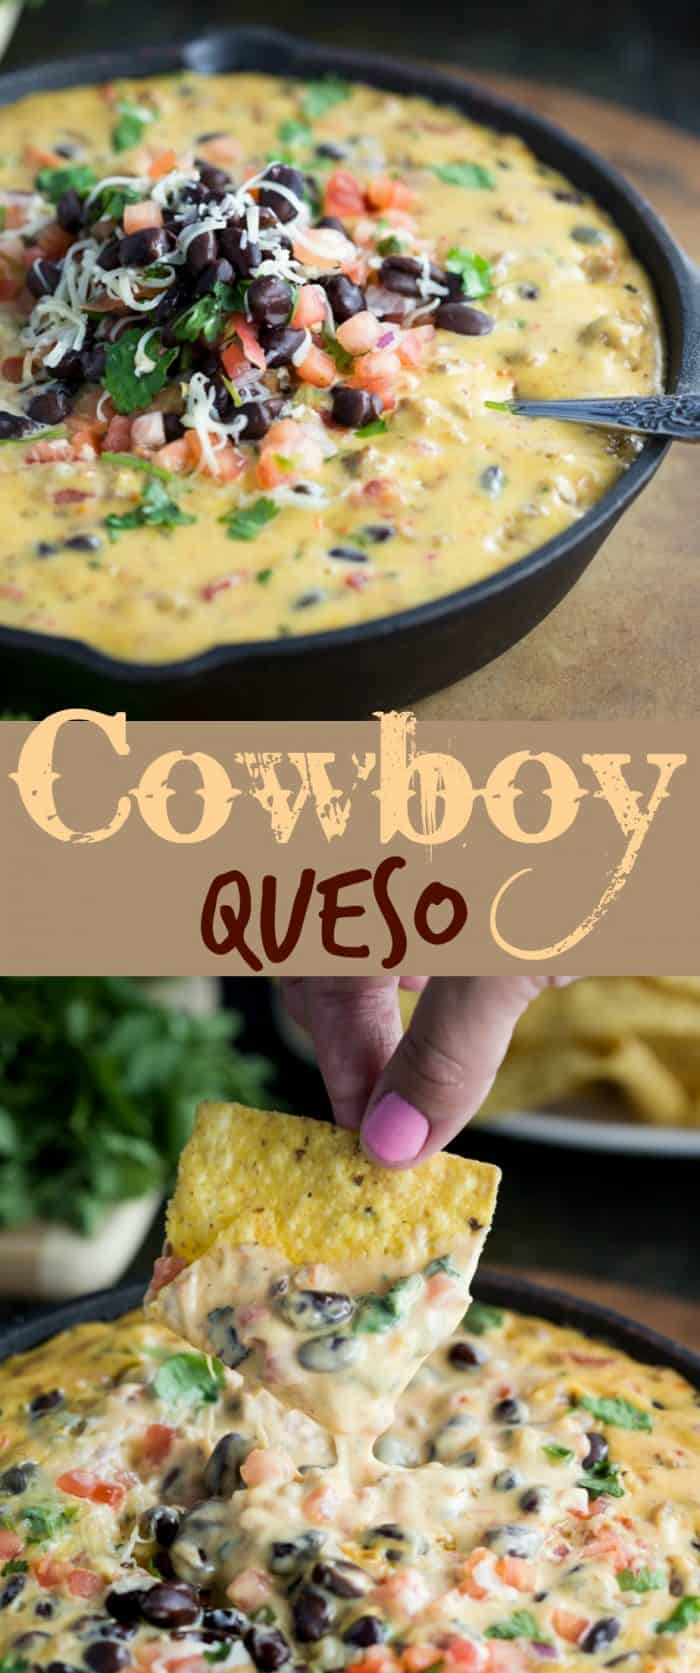 A warm and savory queso dip with your favorite ale, ground beef, tomatoes, black beans, and fresh cilantro. | The Cozy Cook | #dip #appetizer #football #mexican #cheese #gameday #queso #blackbeans #beef #recipe #fingerfood #easyrecipes #partyfood #snacks